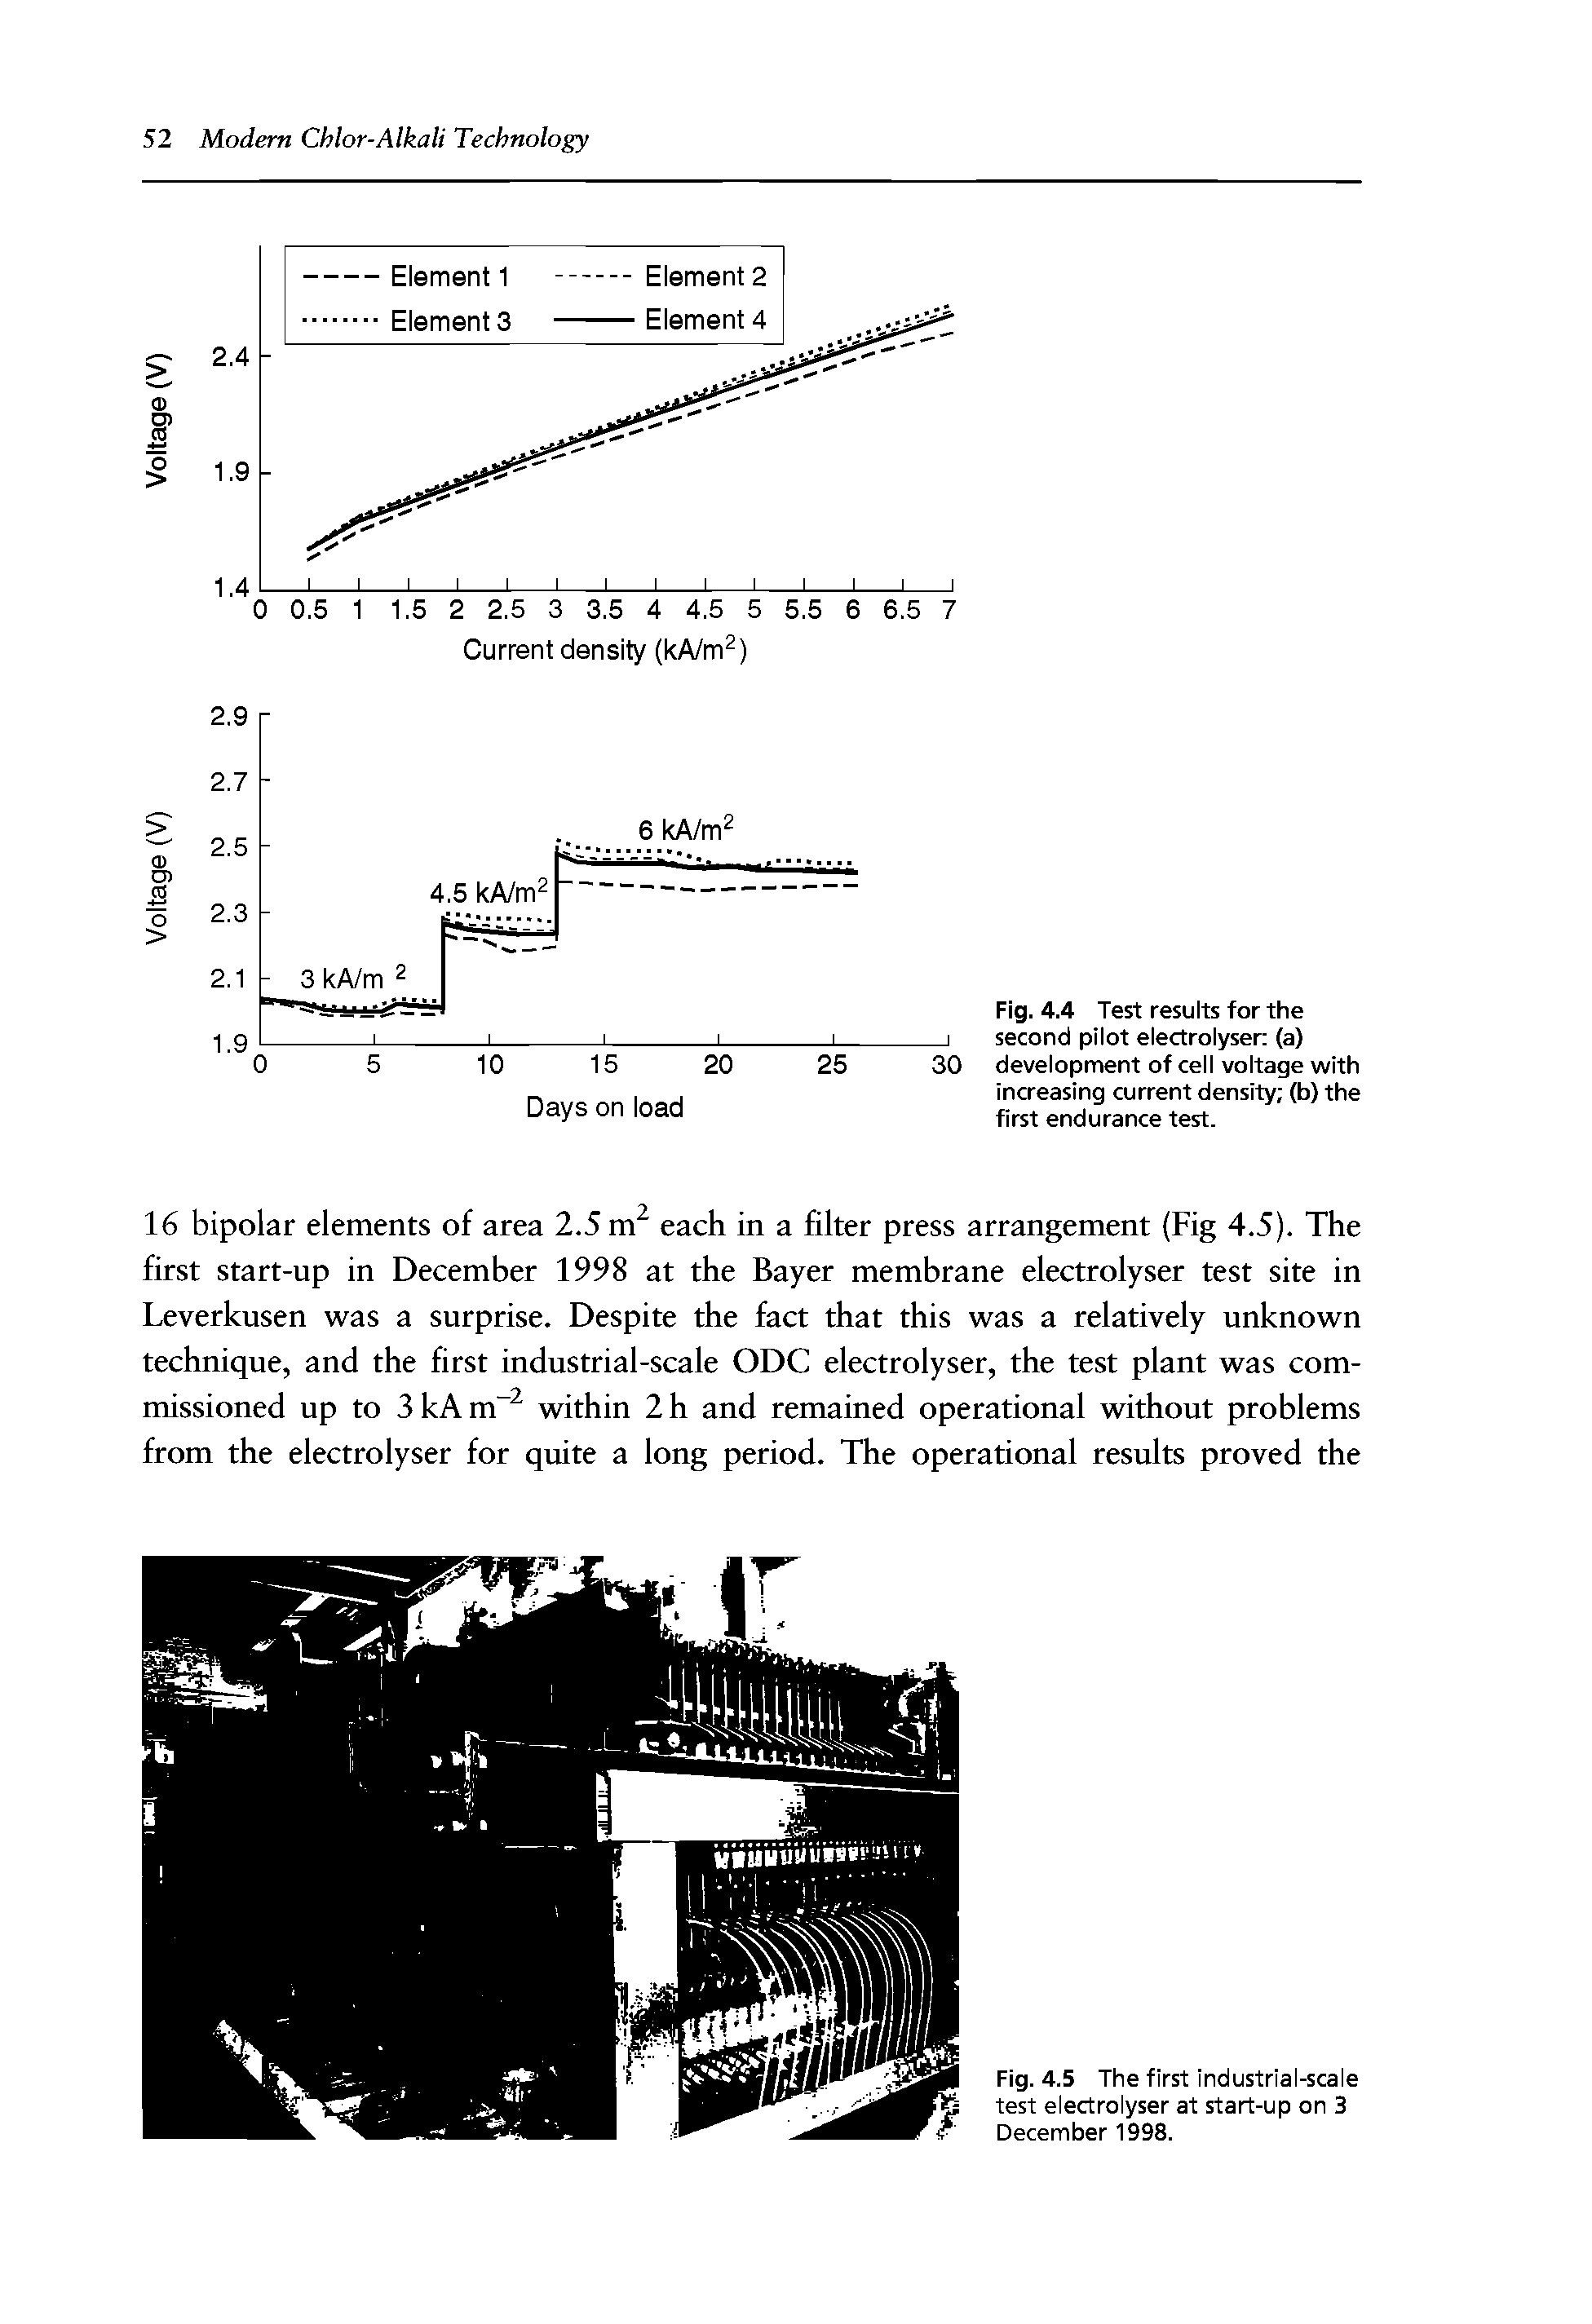 Fig. 4.4 Test results for the second pilot electrolyser (a) development of cell voltage with increasing current density (b) the first endurance test.